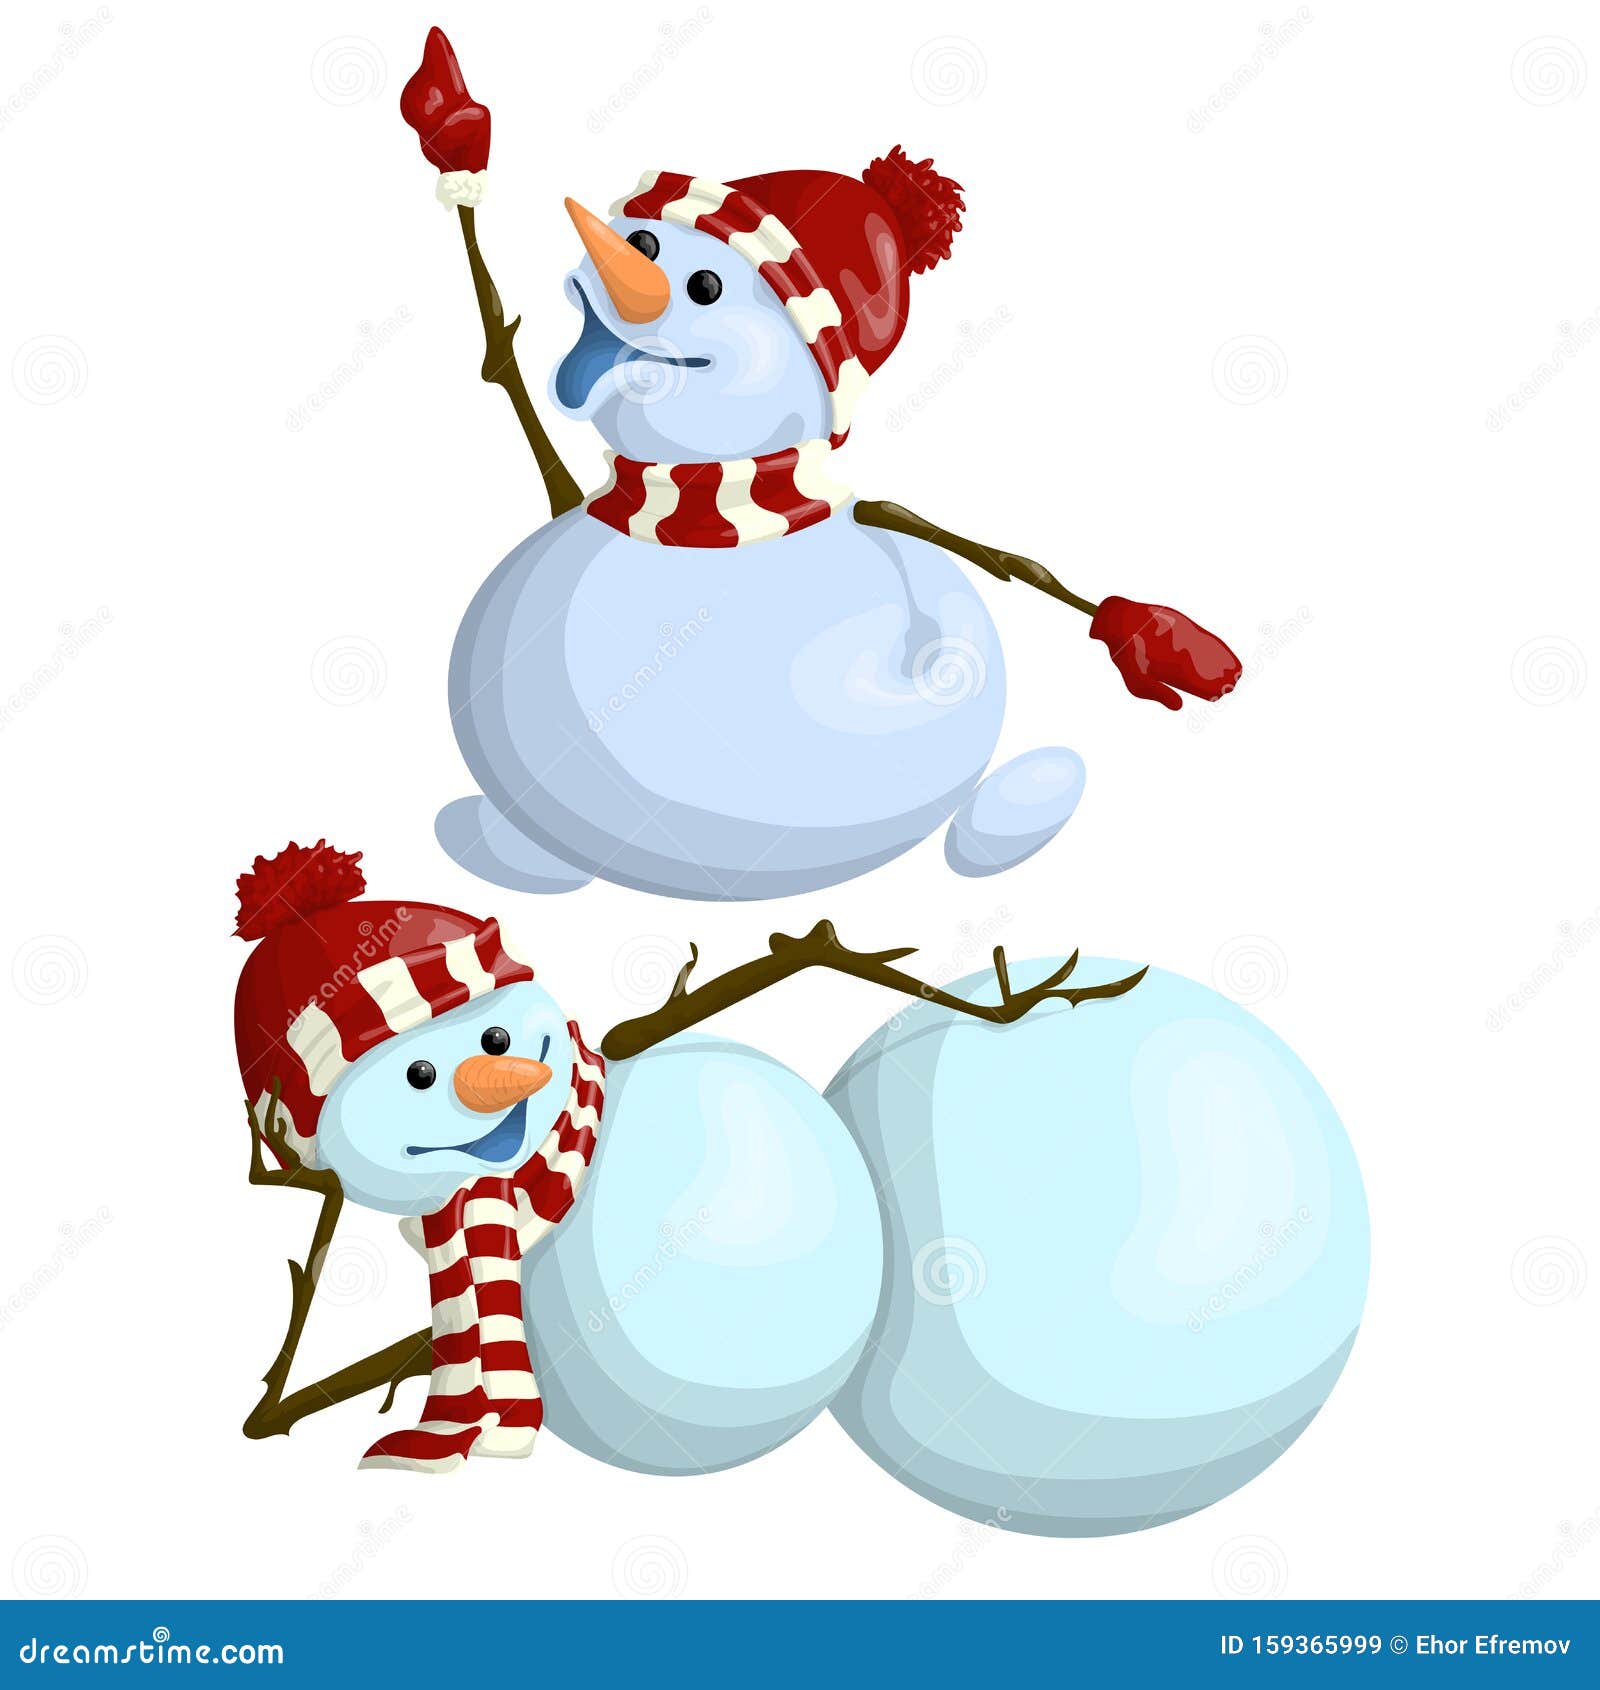 Two Cheerful Funny Snowman Cartoon Style Stock Vector - Illustration of  kids, cute: 159365999